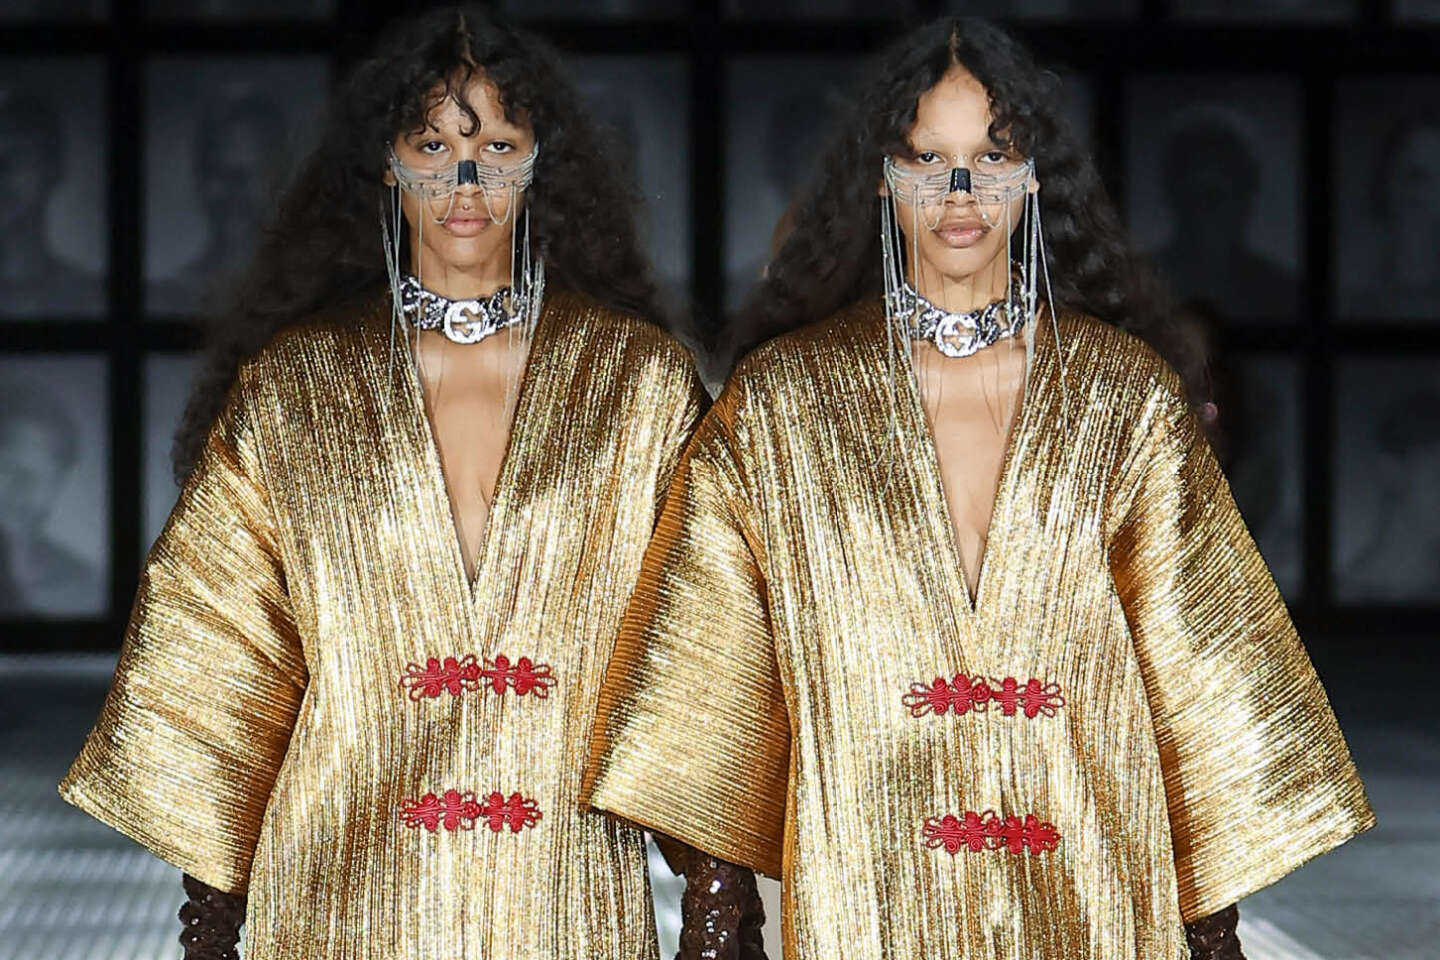 Milan Fashion Week's 11 Wildest Moments From Gucci, Versace, & More